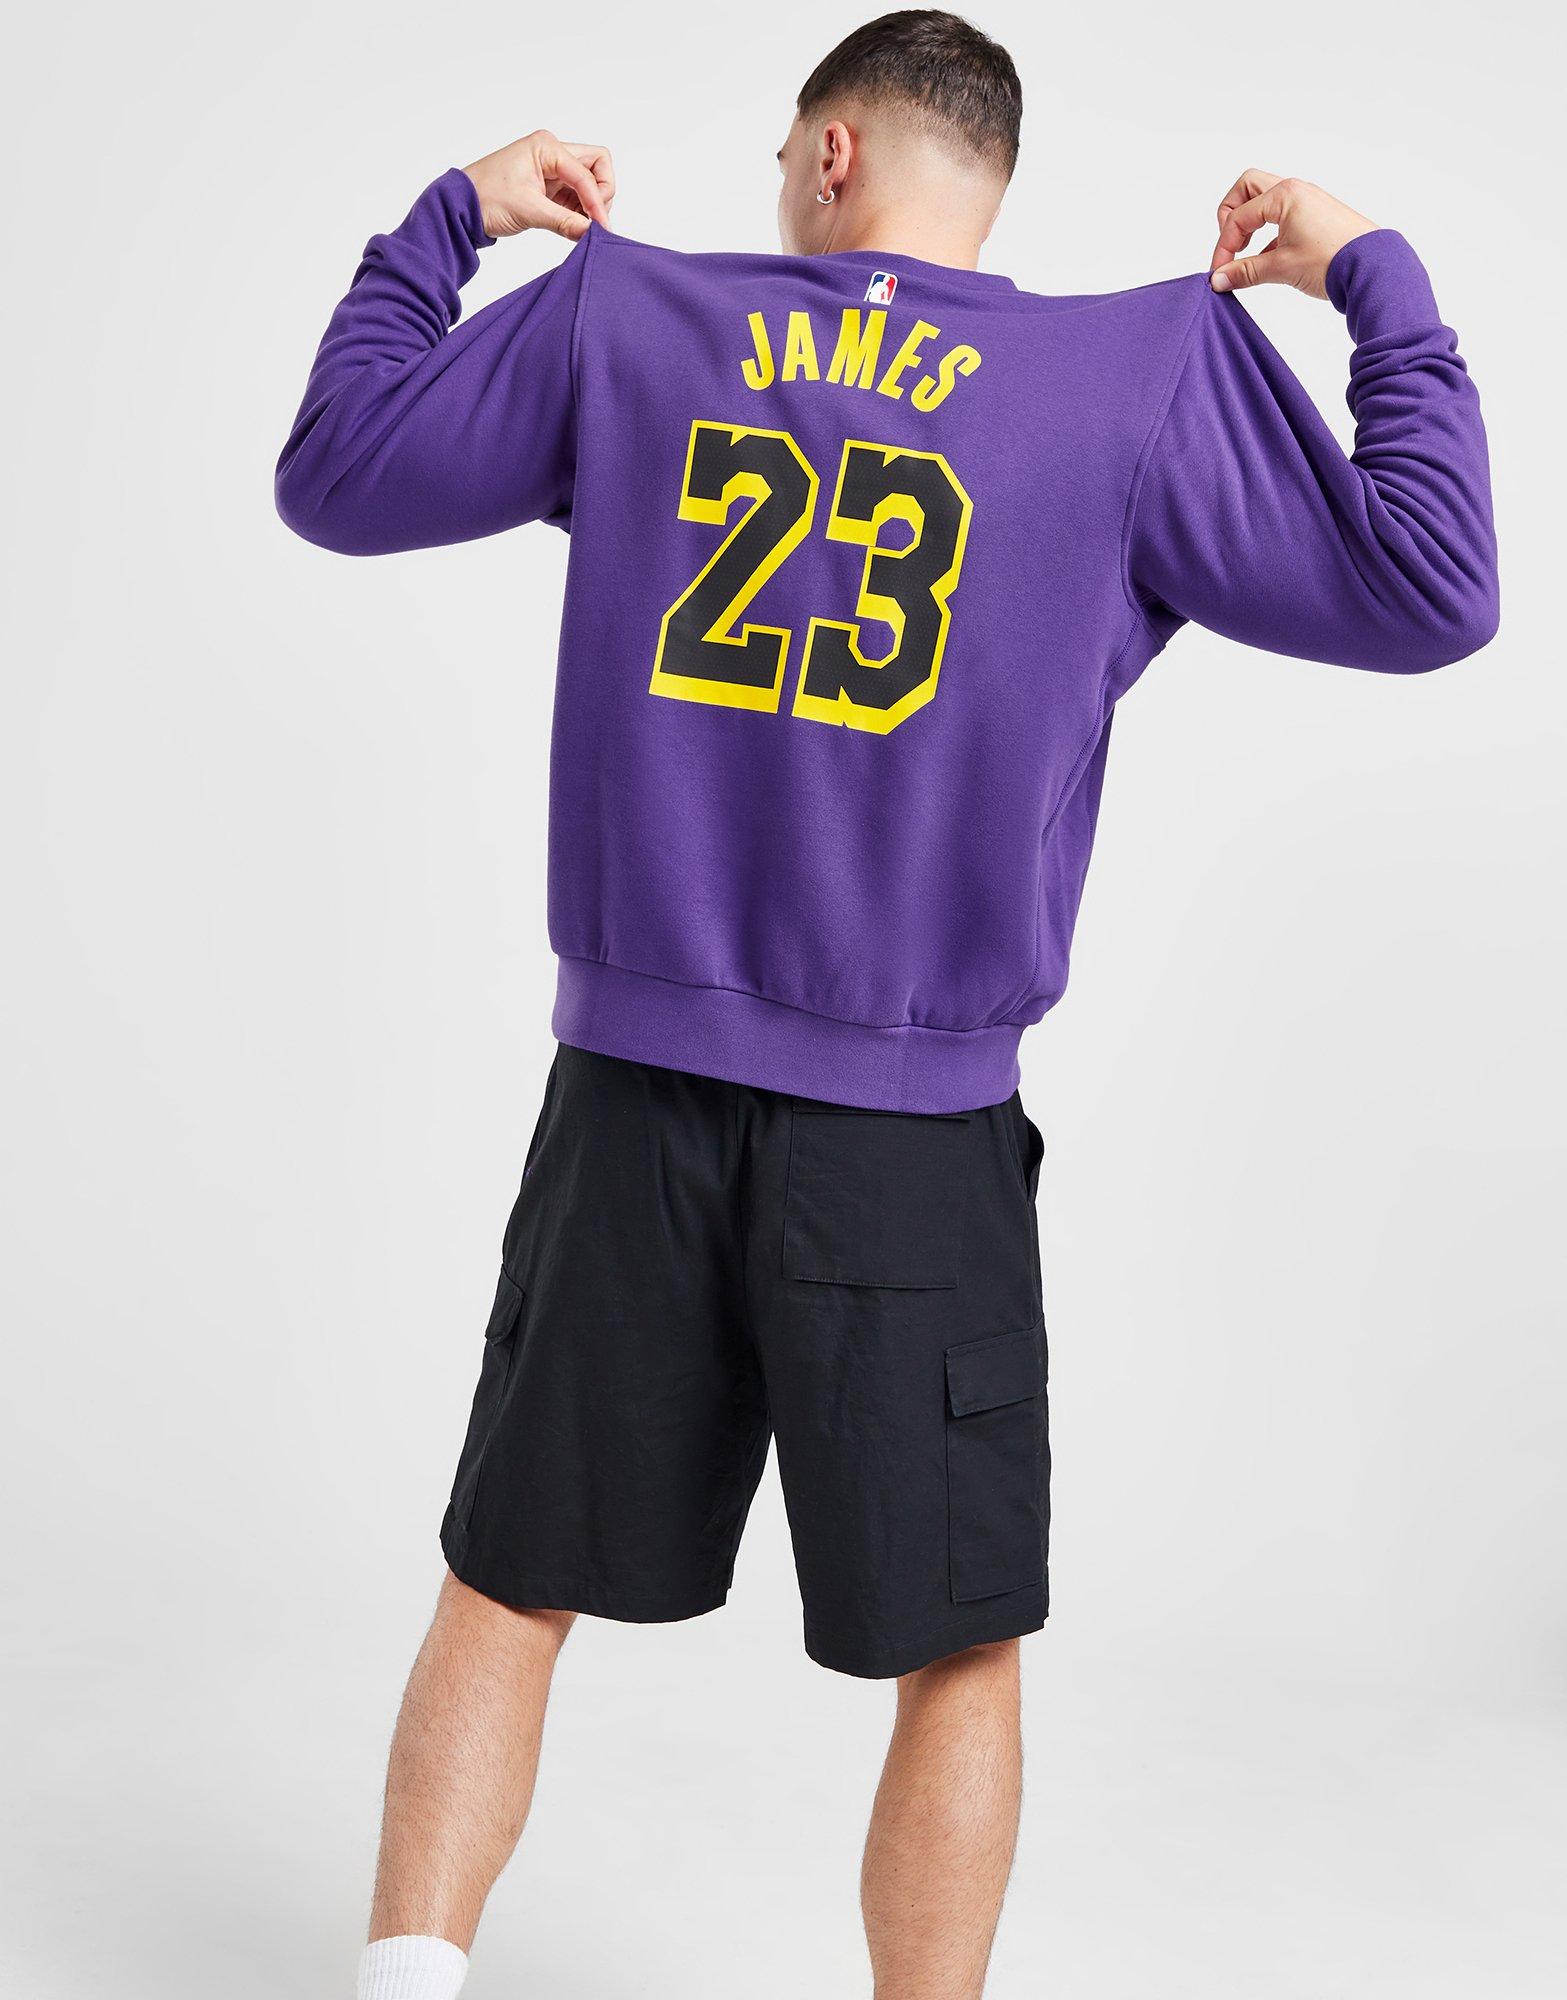 James #23 Kids Basketball Jersey T-Shirts Youth Sizes Set with Arm Sleeve